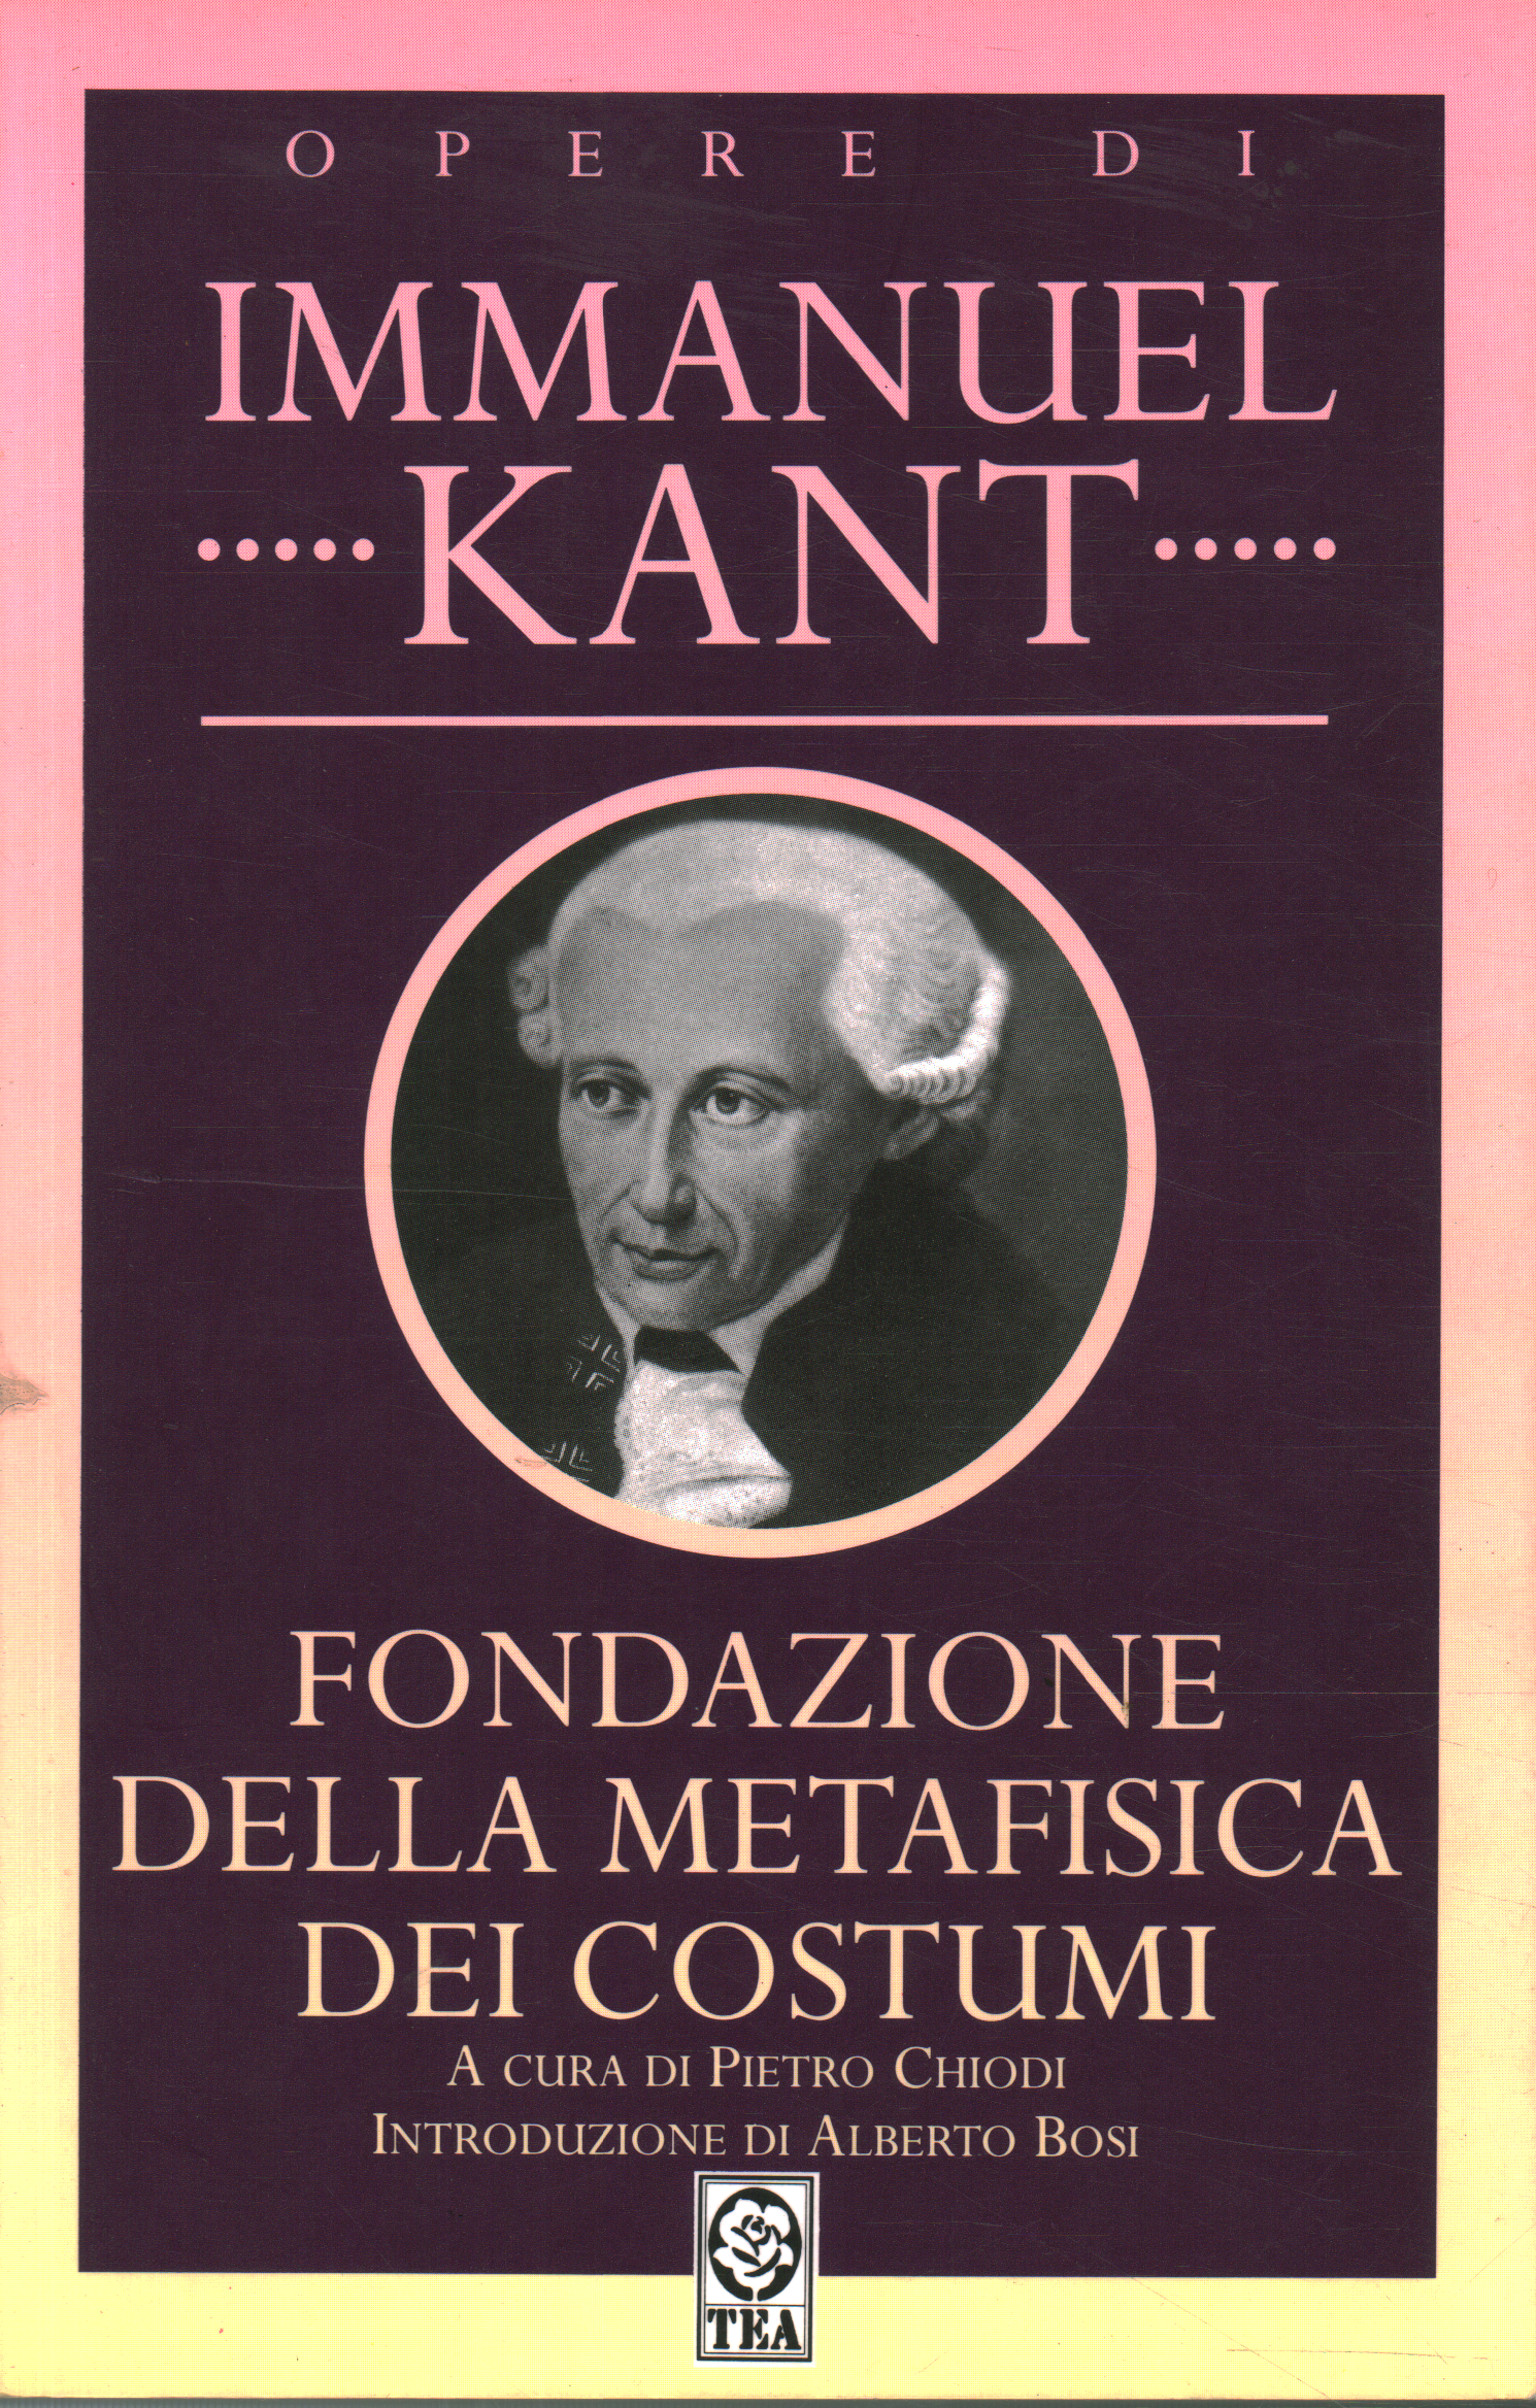 Foundation of the metaphysics of costumes, Immanuel Kant